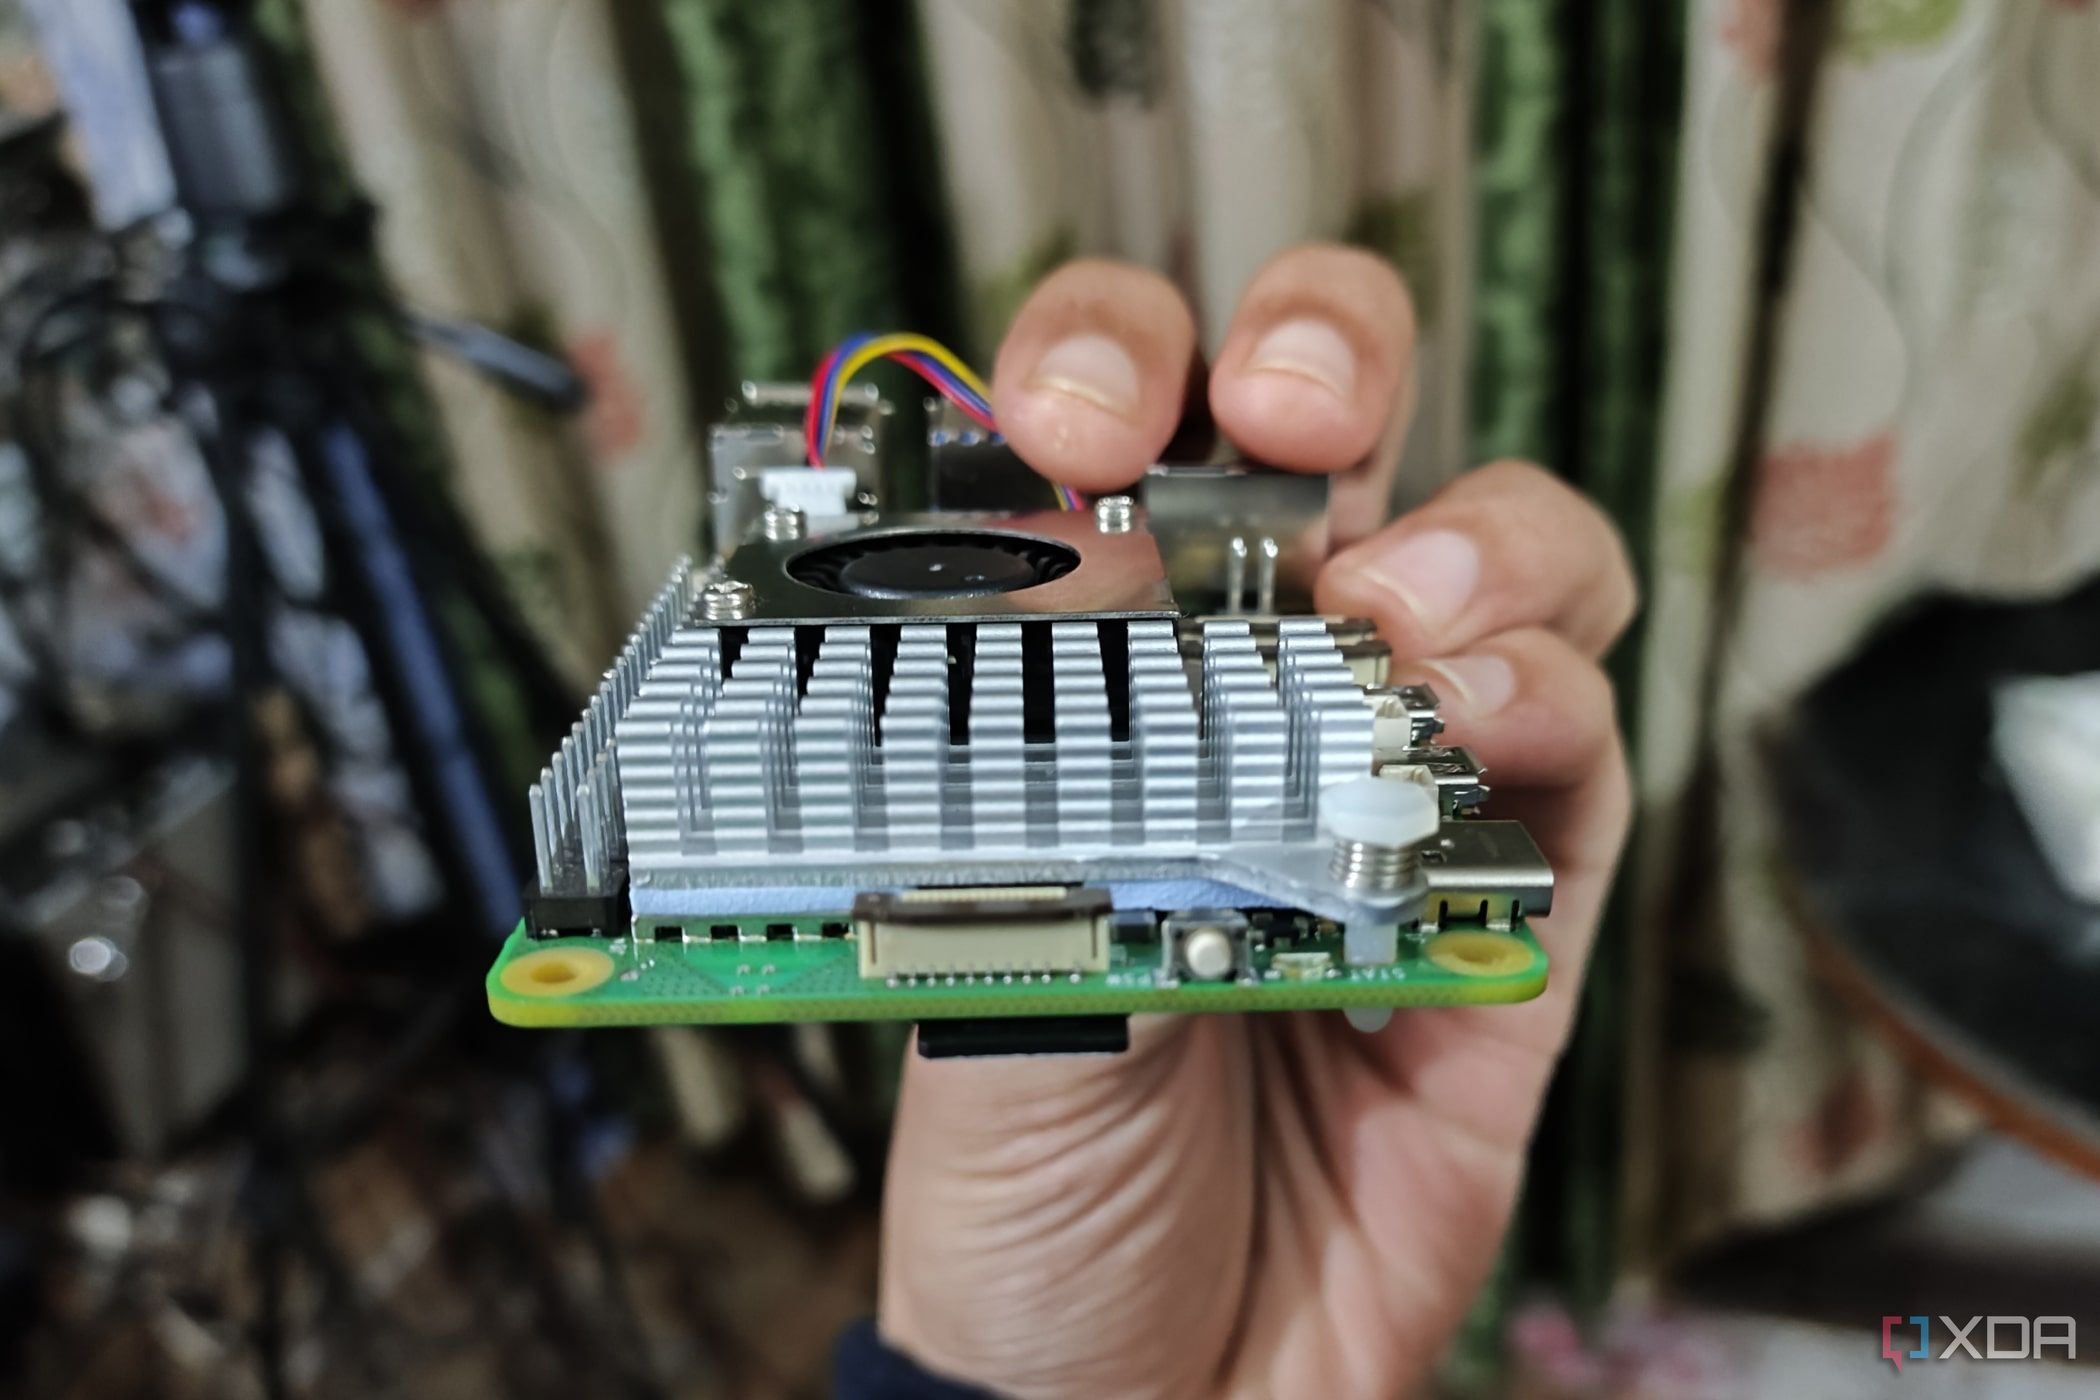 An image of the Raspberry Pi 5 with the power button and PCIe interface visible